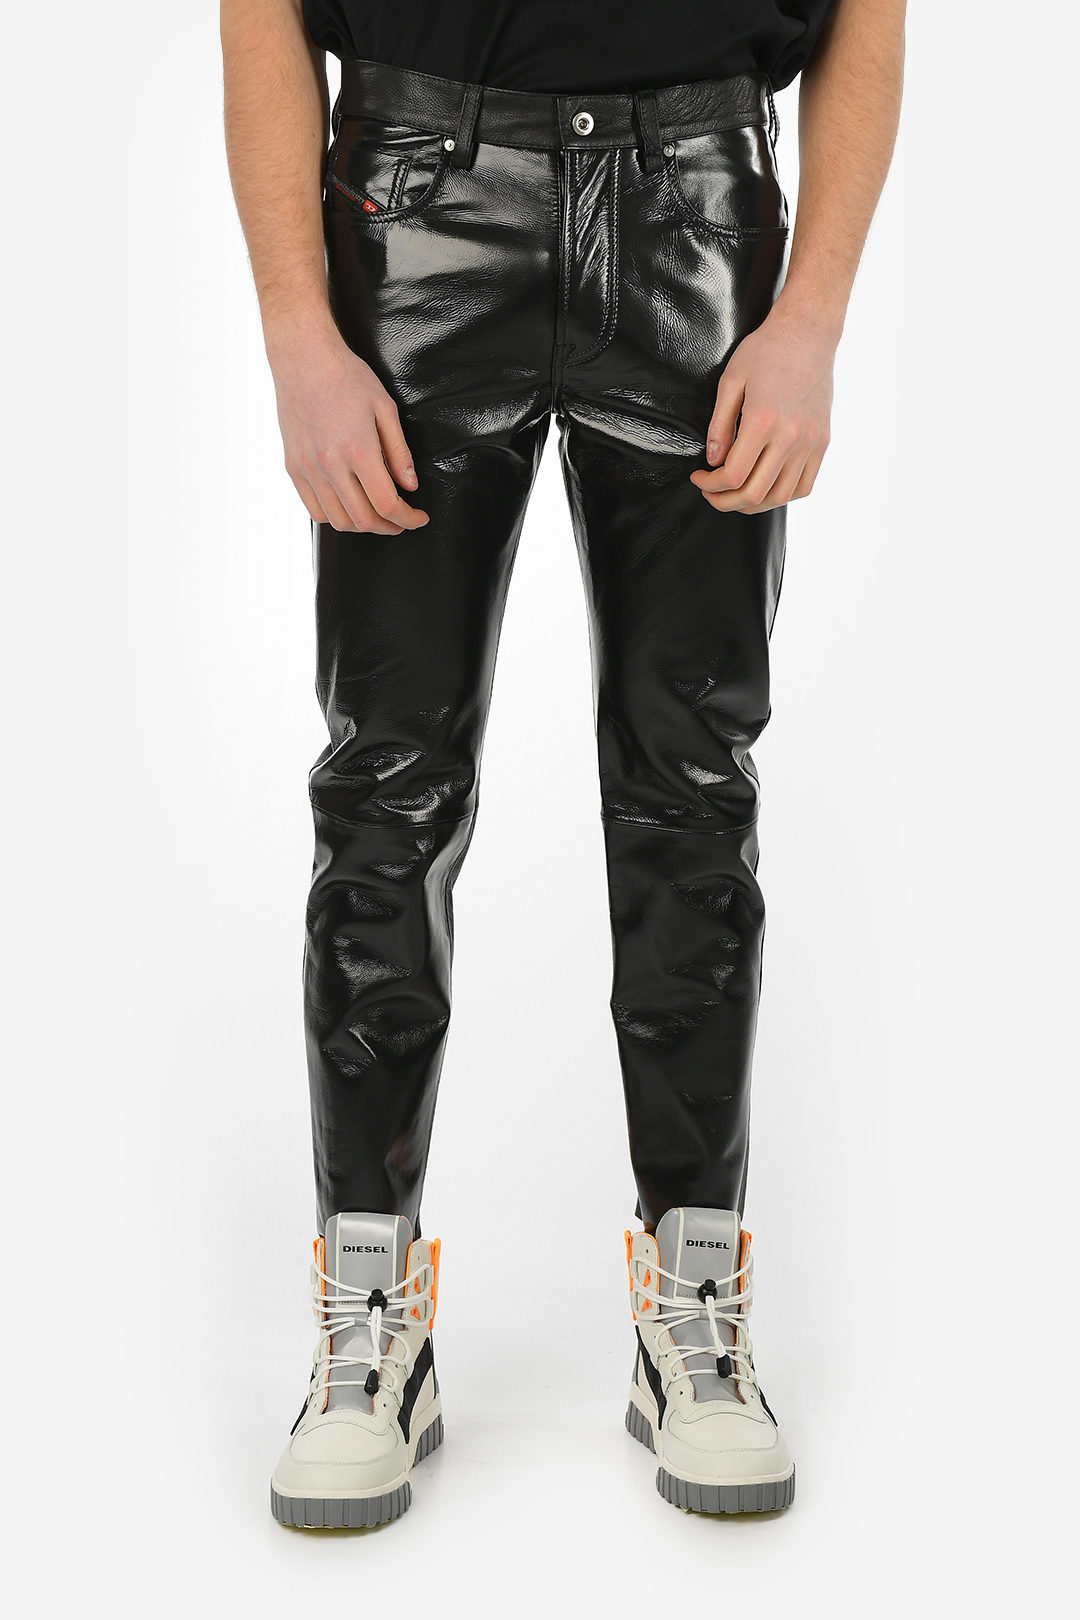 vision mikrofon romersk Diesel Patent Leather P-MHARKY Pants men - Glamood Outlet